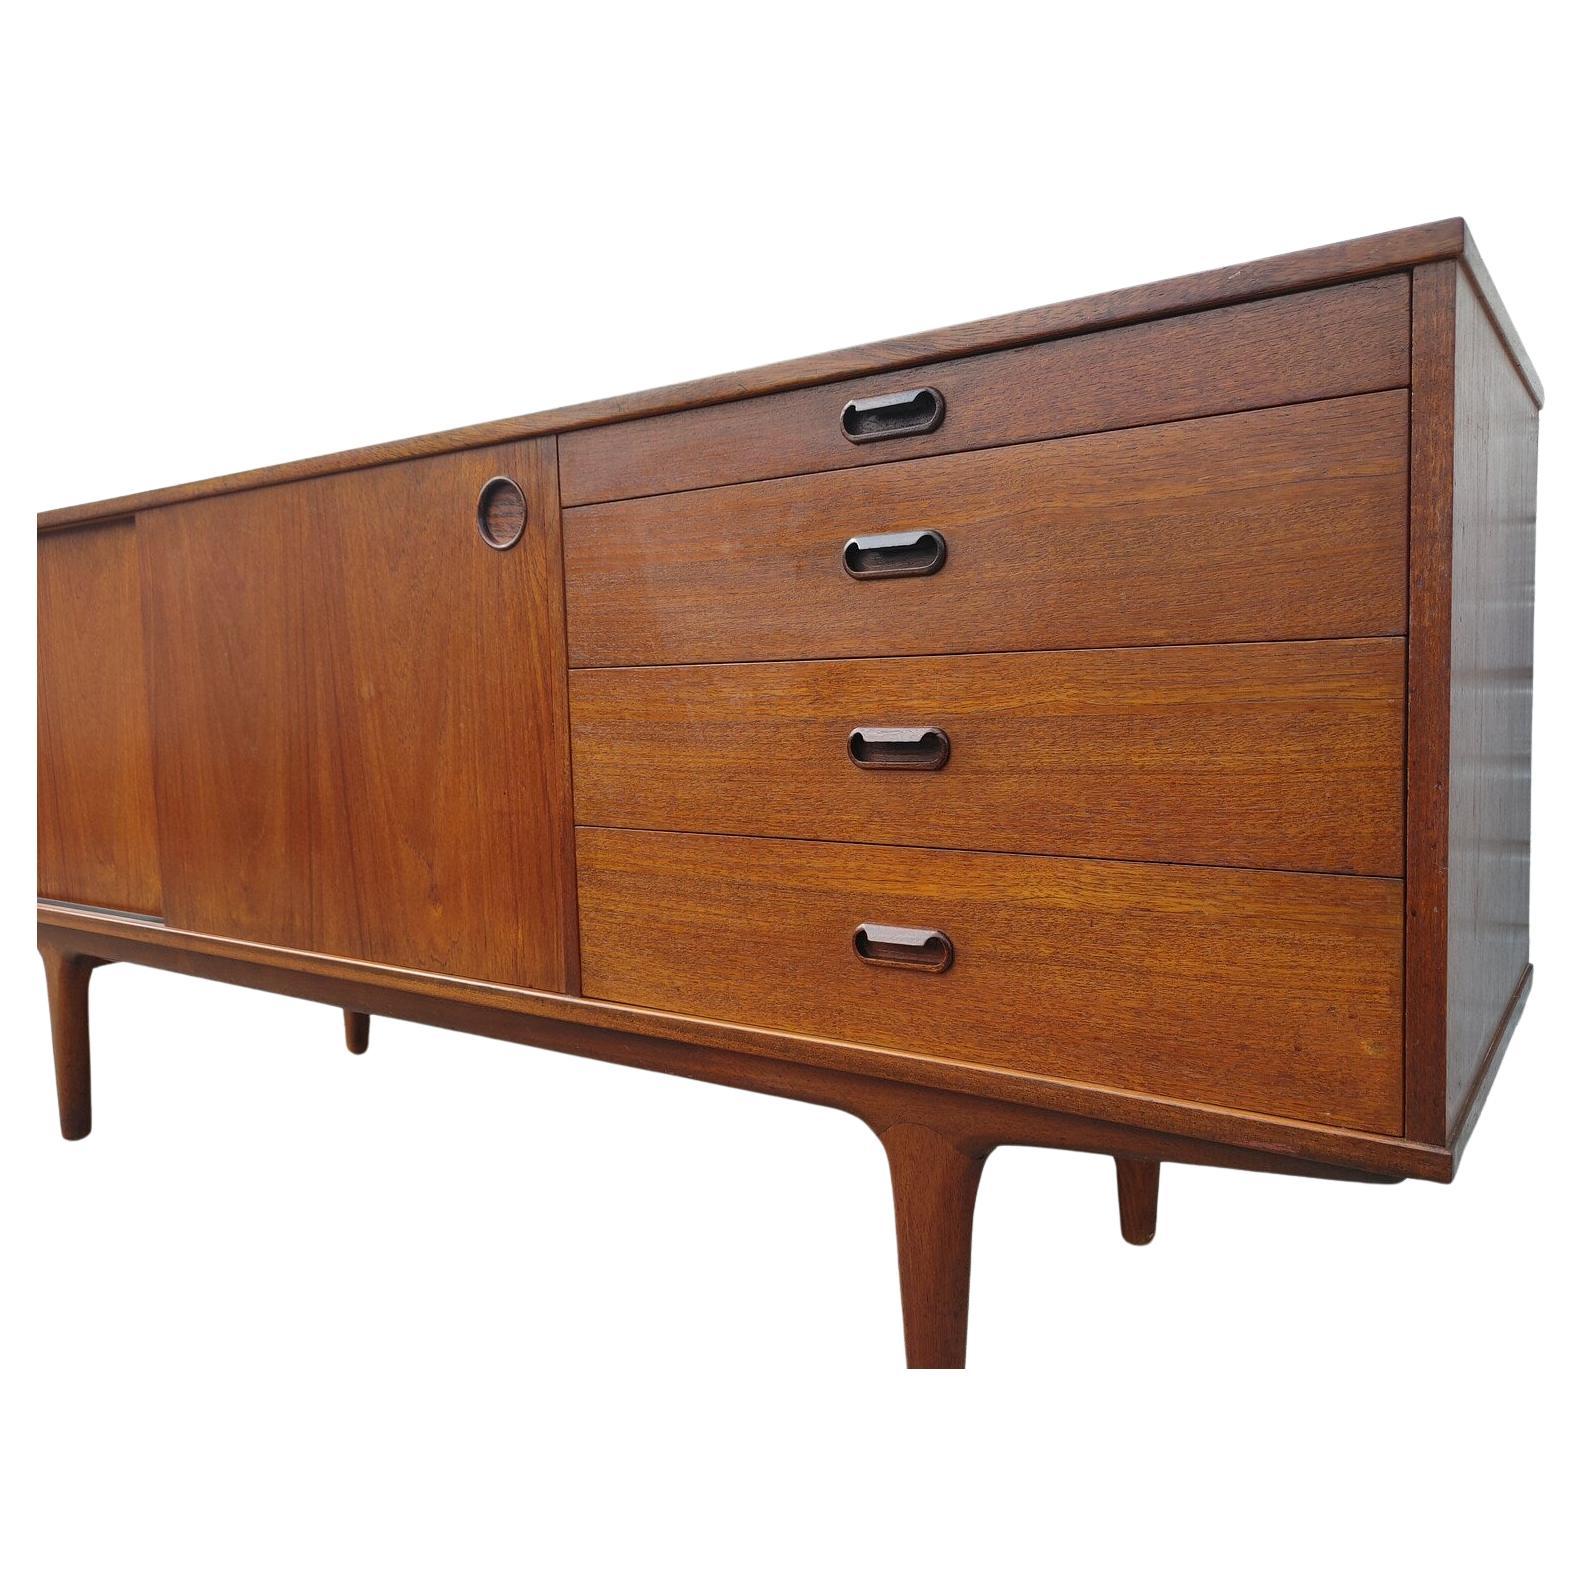 Mid Century Modern Danish Modern Credenza by McIntosh 

Above average vintage condition and structurally sound. Has some expected slight finish wear and scratching. Top has been refinished and does not have original factory finish. Outdoor listing